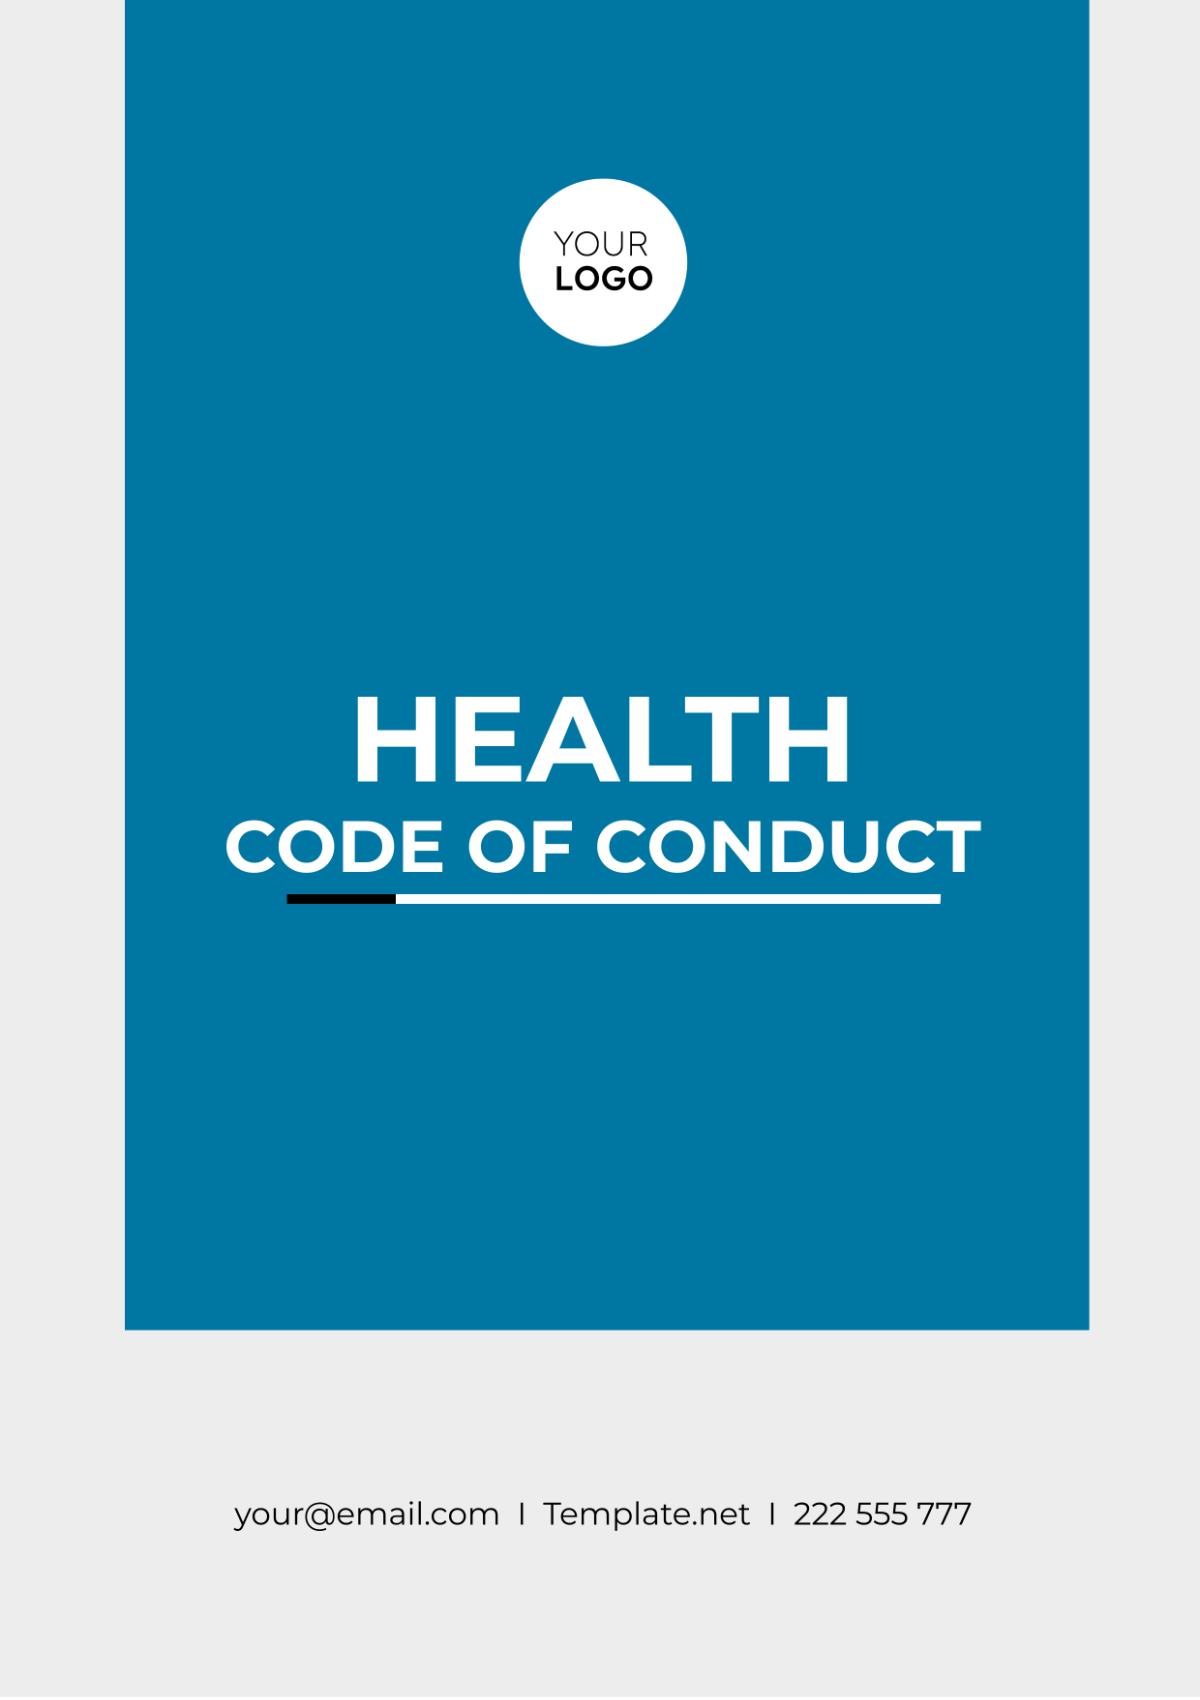 Health Code of Conduct Template